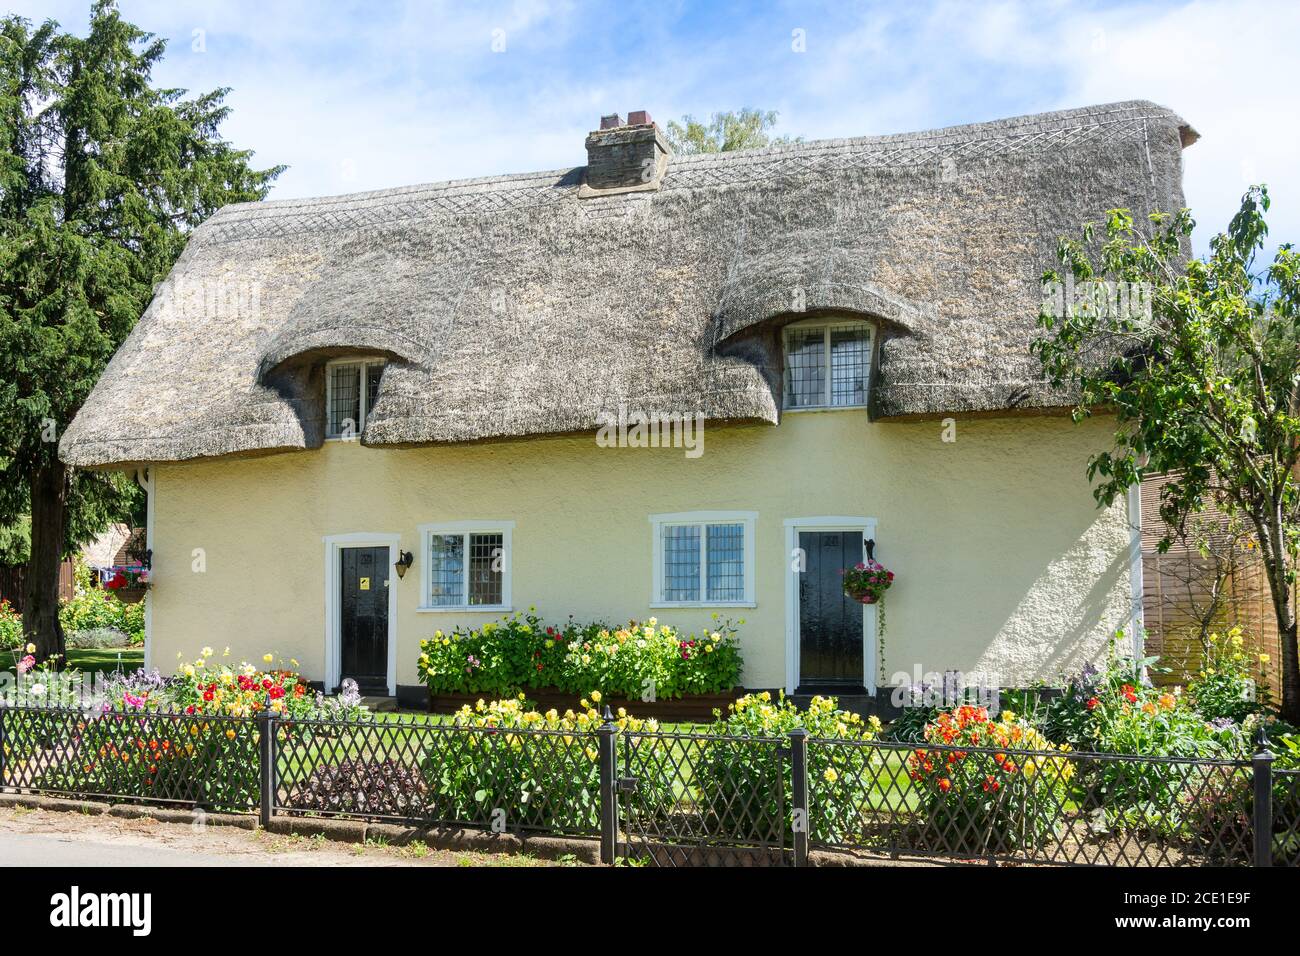 Thatched cottage and garden, The Village, Old Warden, Bedfordshire, England, United Kingdom Stock Photo